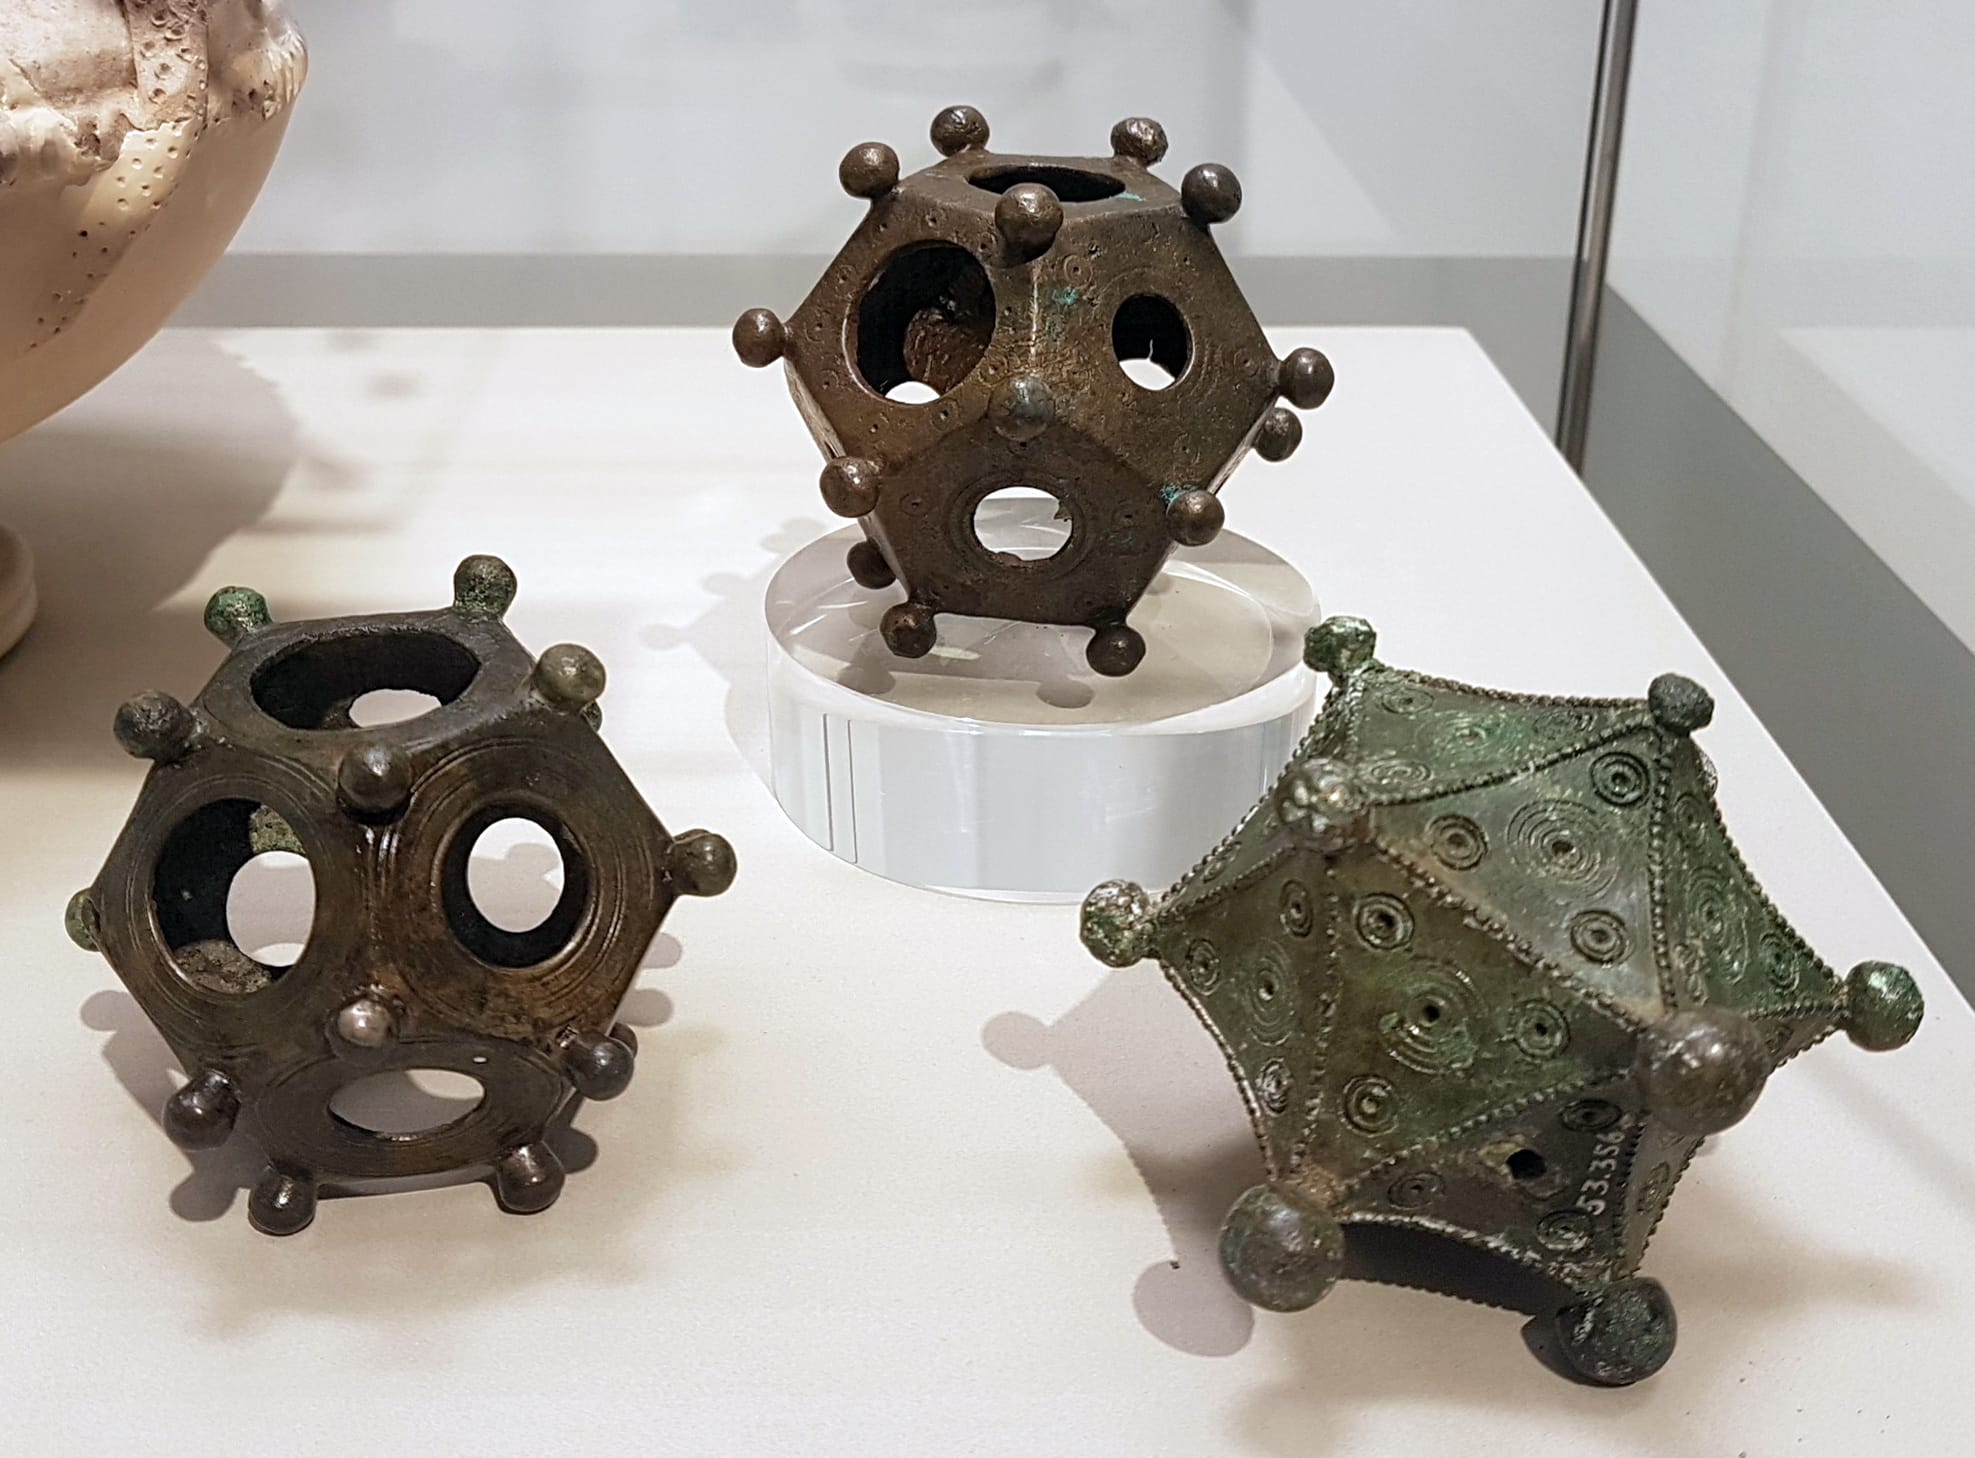 Two ancient Roman bronze dodecahedrons and an icosahedron